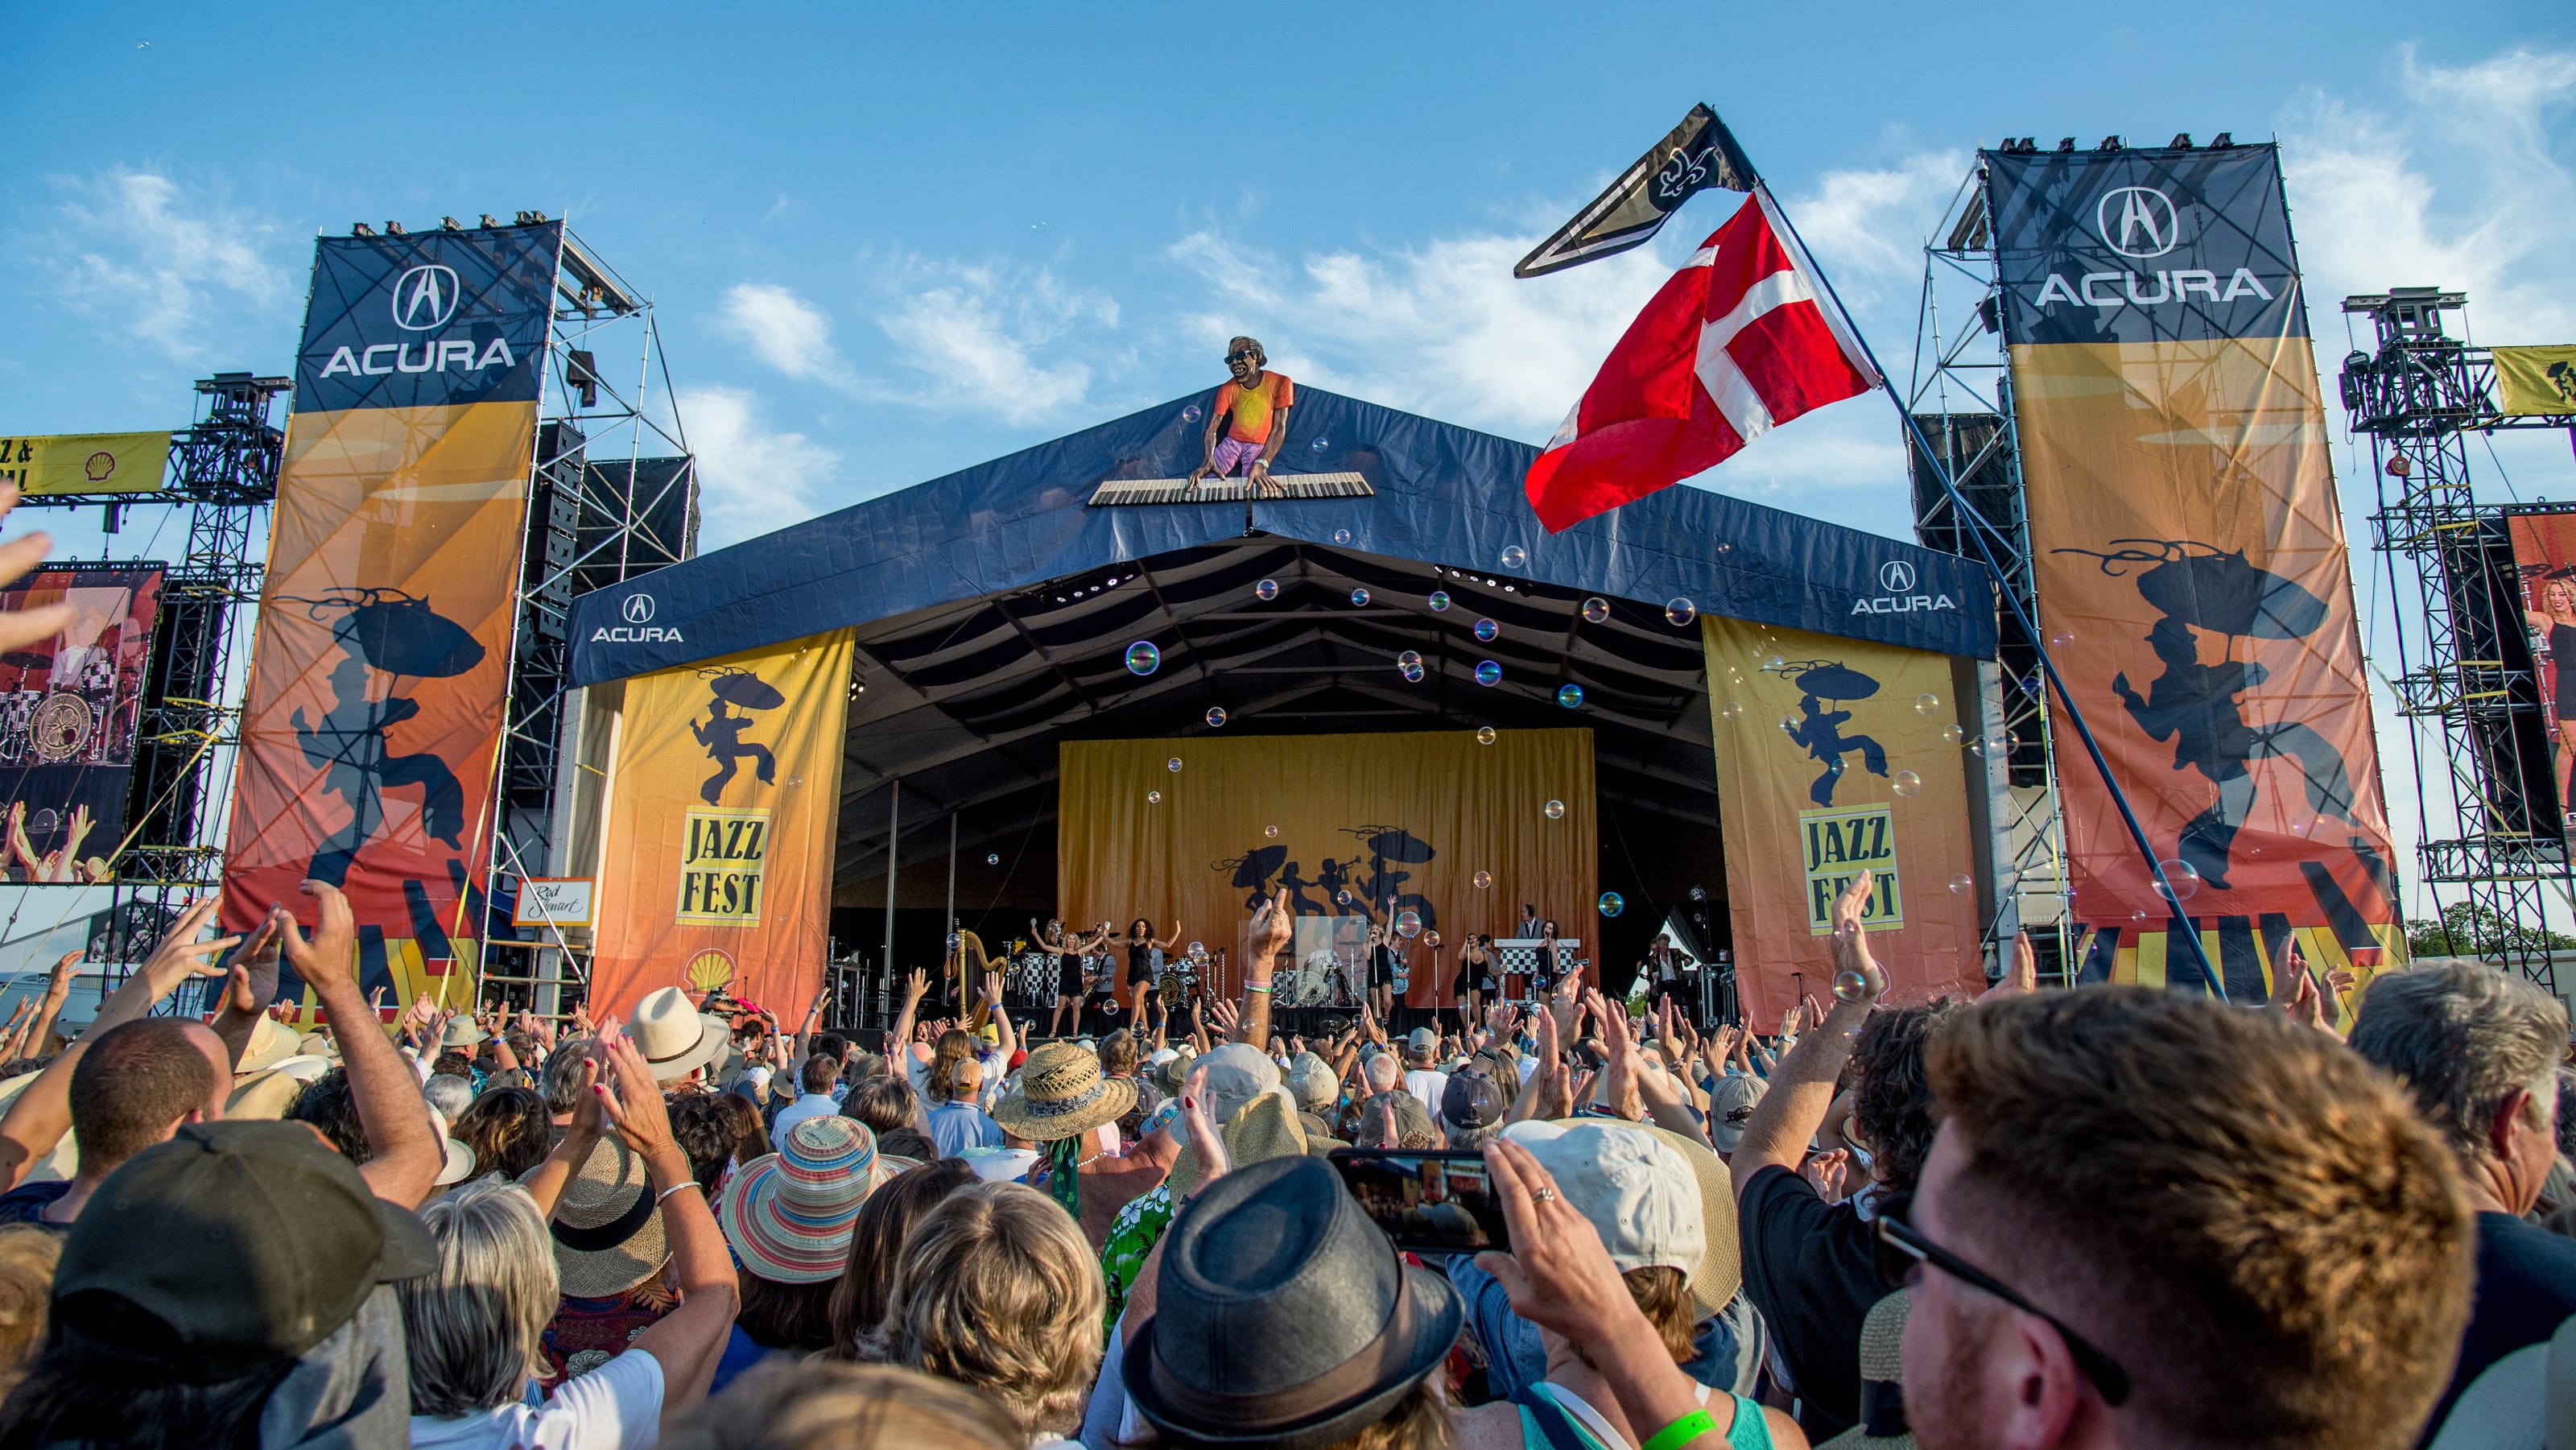 New Orleans Jazz Fest canceled again due to COVID19